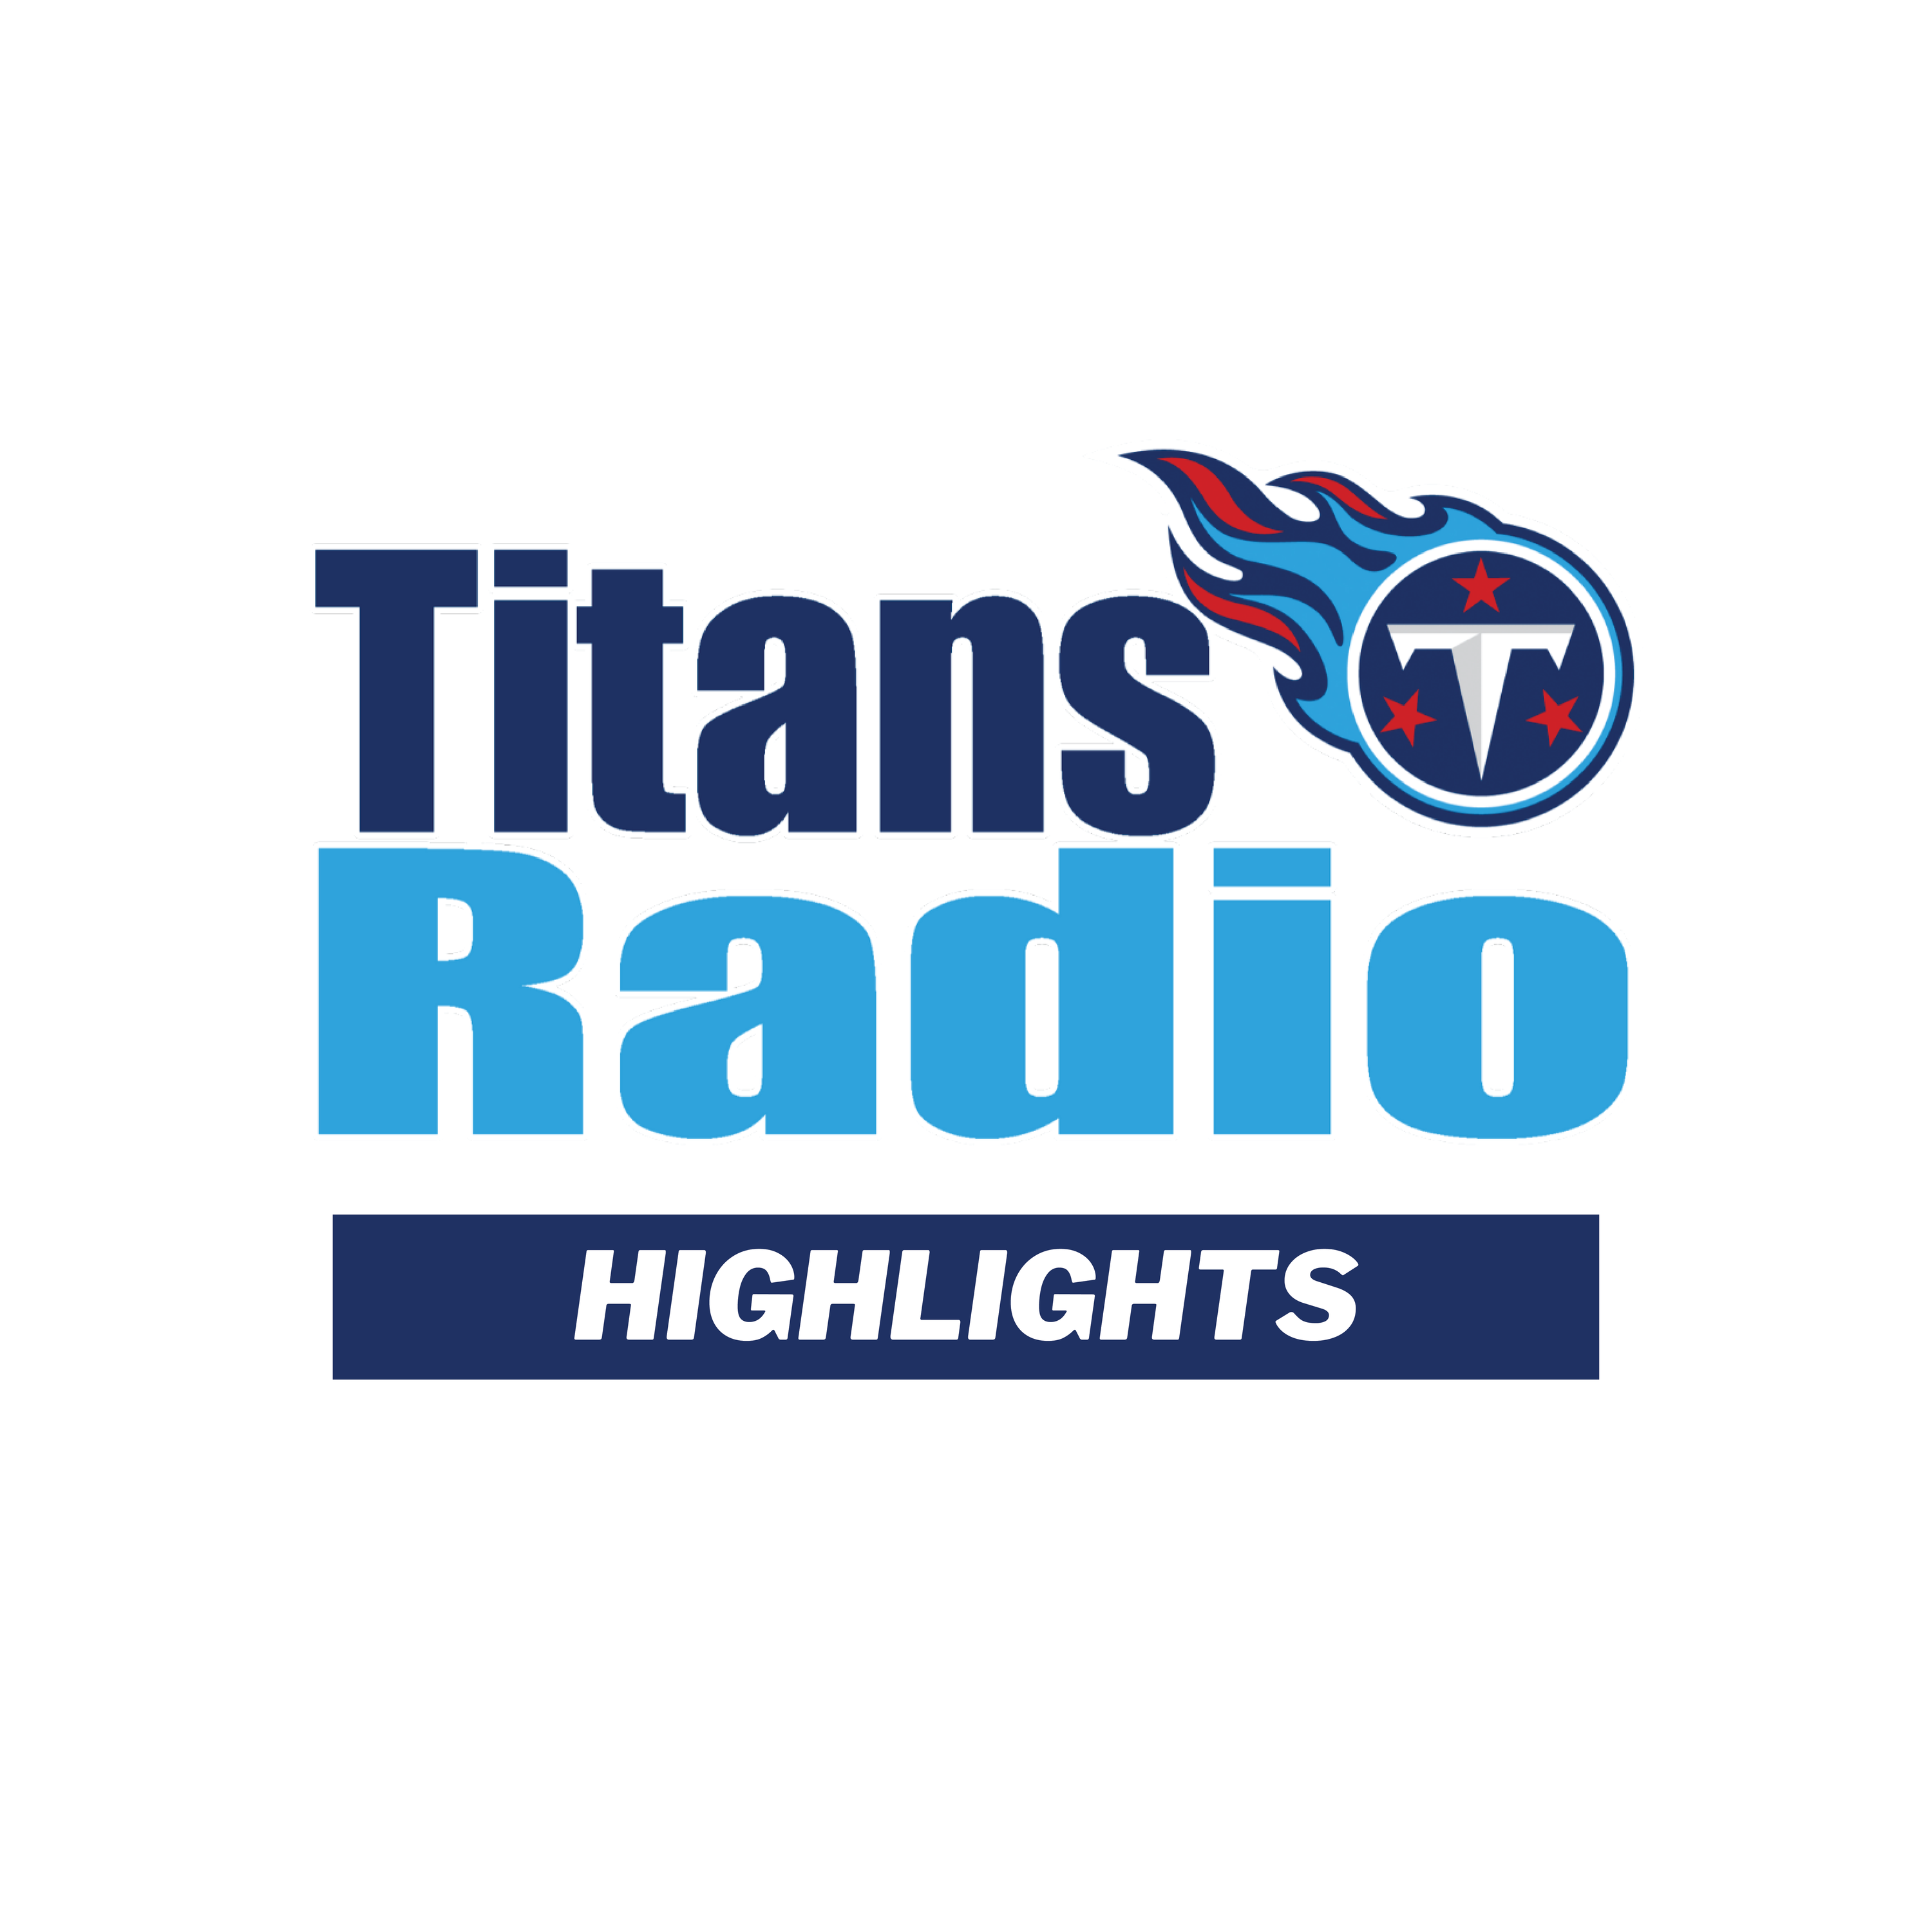 Titans Beat Dolphins on MNF